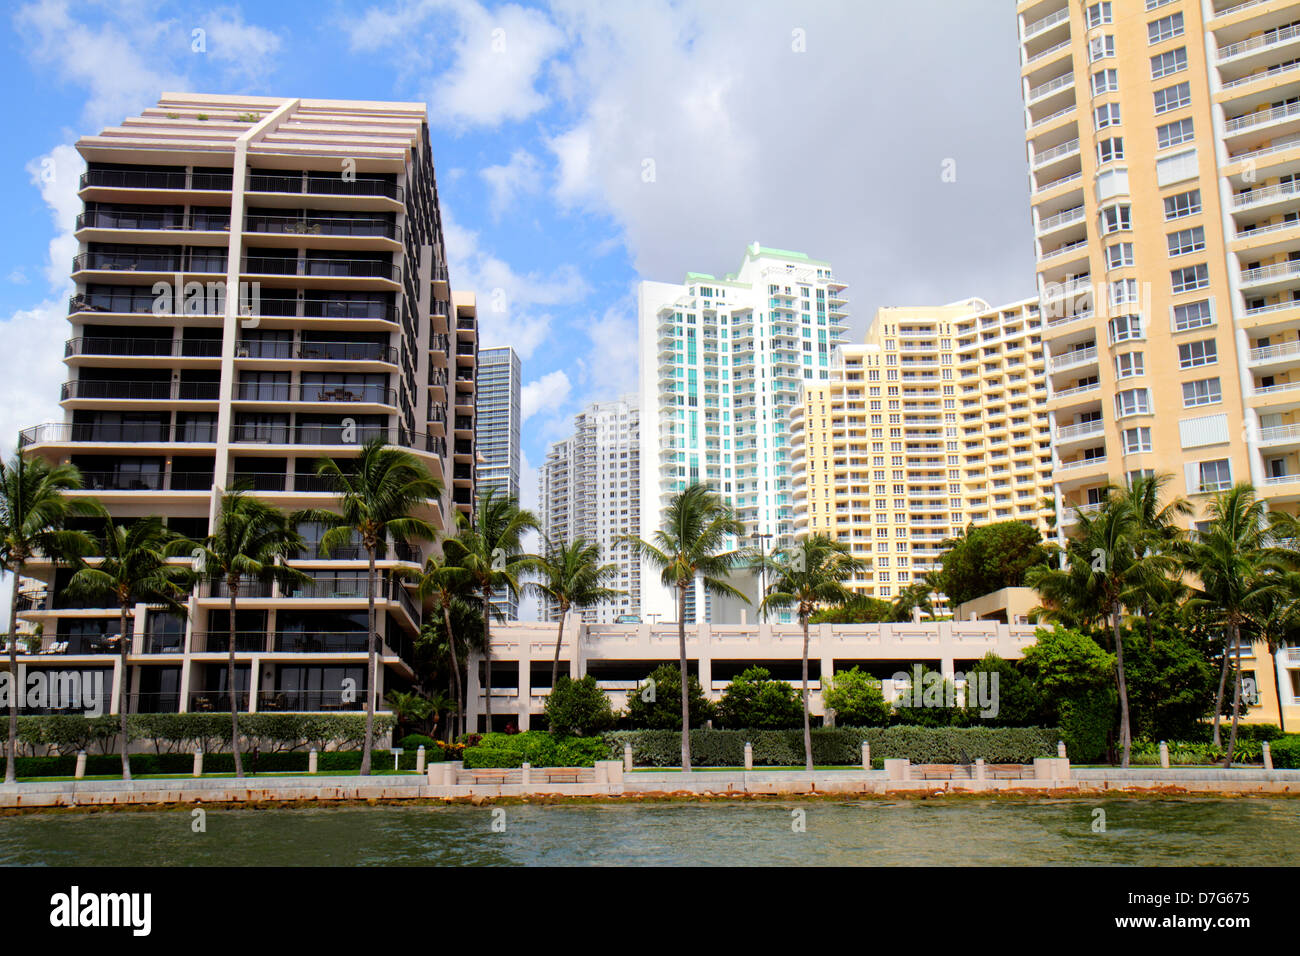 Miami Florida,Brickell Key,Biscayne Bay,waterfront,condominium residential apartment apartments building buildings housing,city skyline,water,high ris Stock Photo